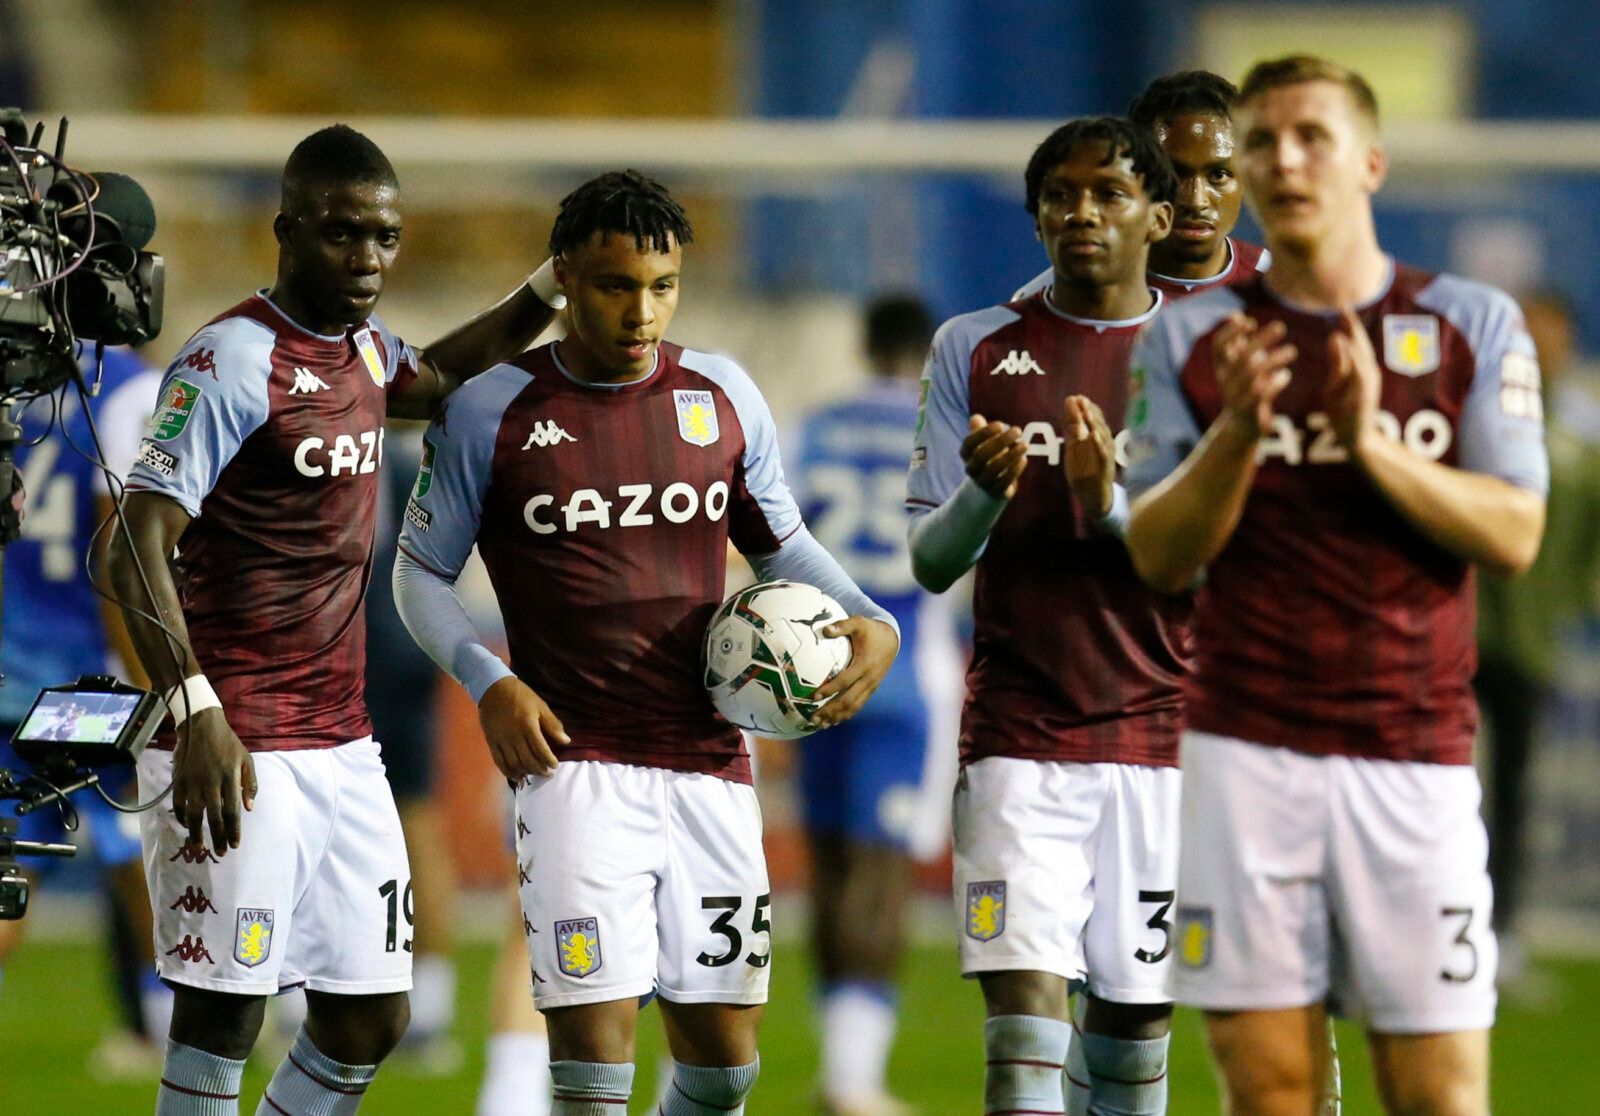 Soccer - England - Carabao Cup Second Round - Barrow v Aston Villa - Holker Street, Barrow-in-Furness, Britain - August 24, 2021 Aston Villa's Cameron Archer celebrates with teammates after the match after scoring a hat-trick Action Images via Reuters/Ed Sykes